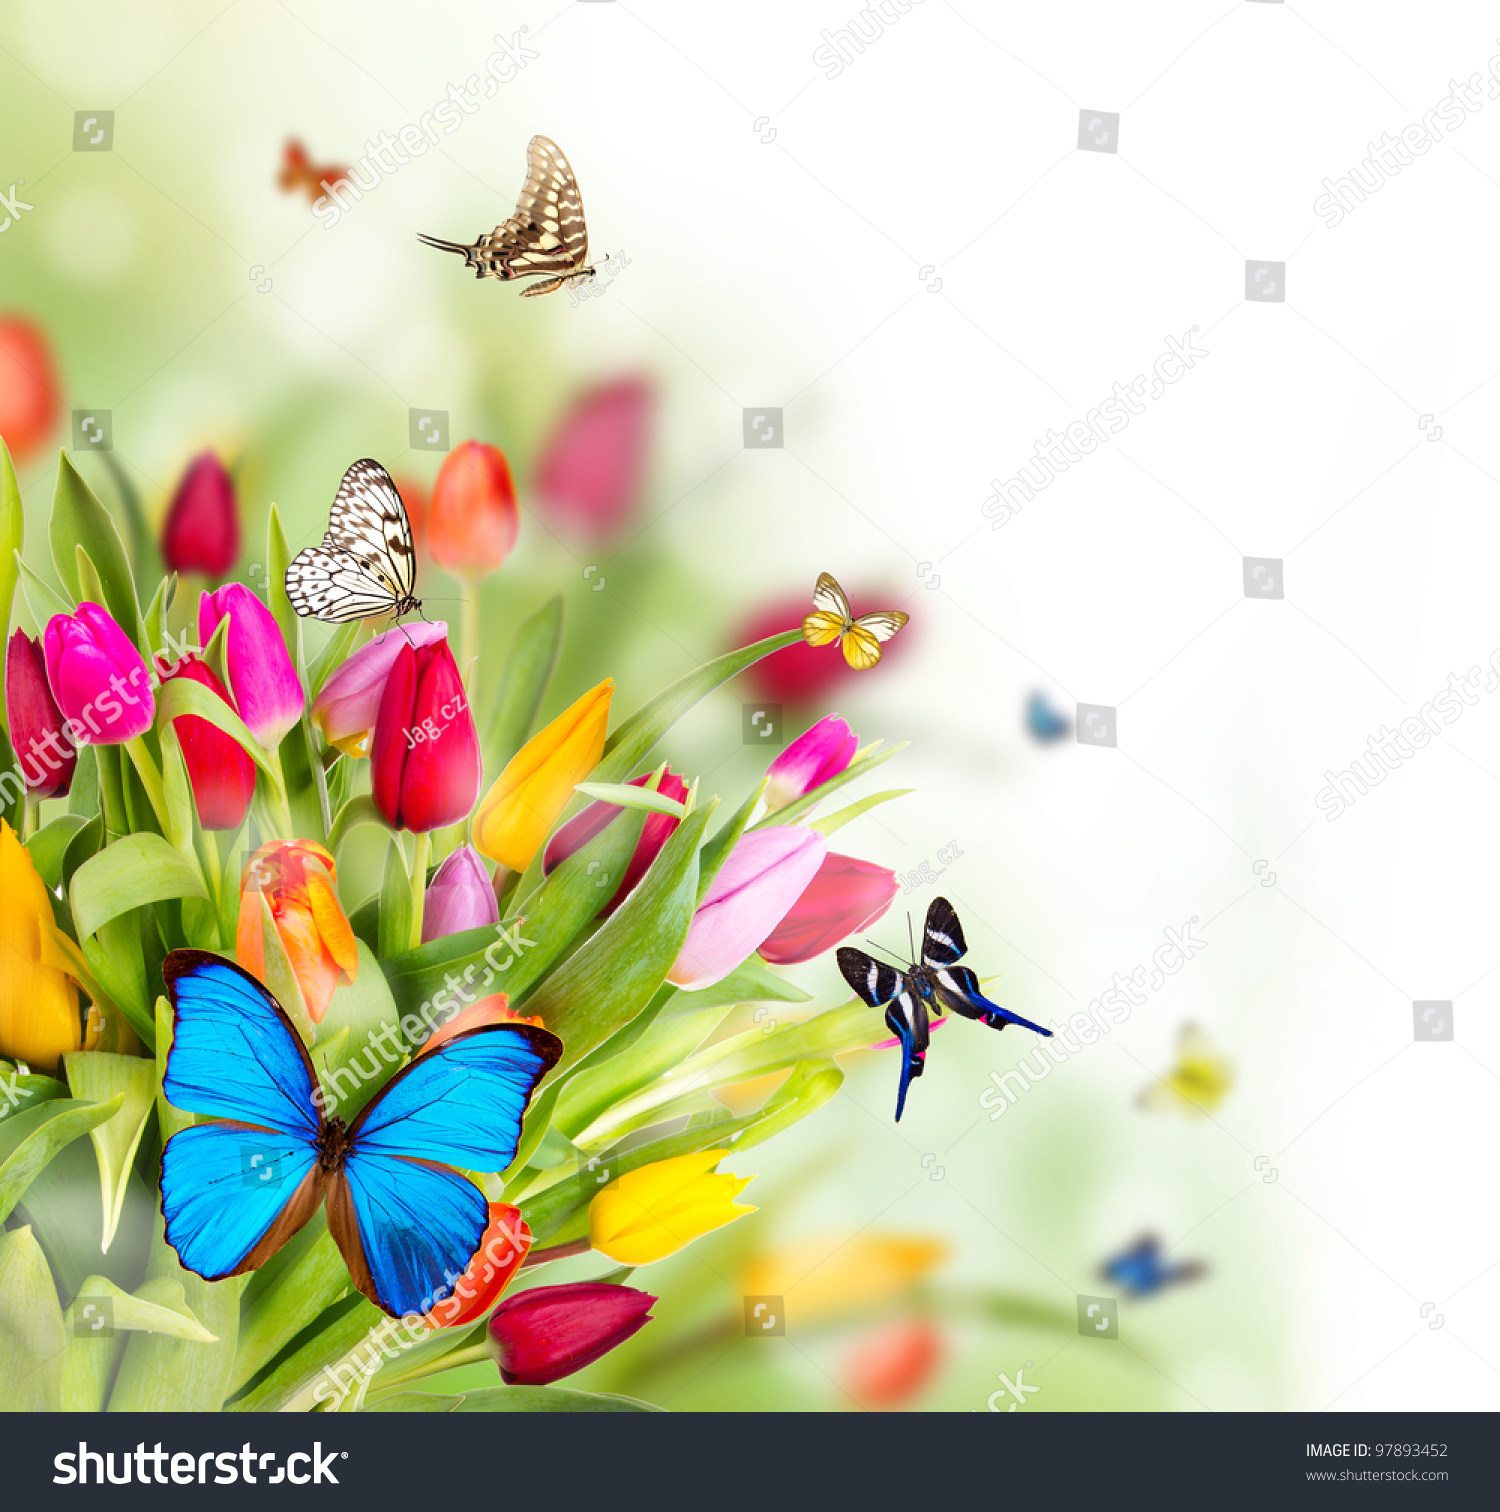 Beautiful Spring Flowers Butterflies Stock Photo (Royalty Free ...